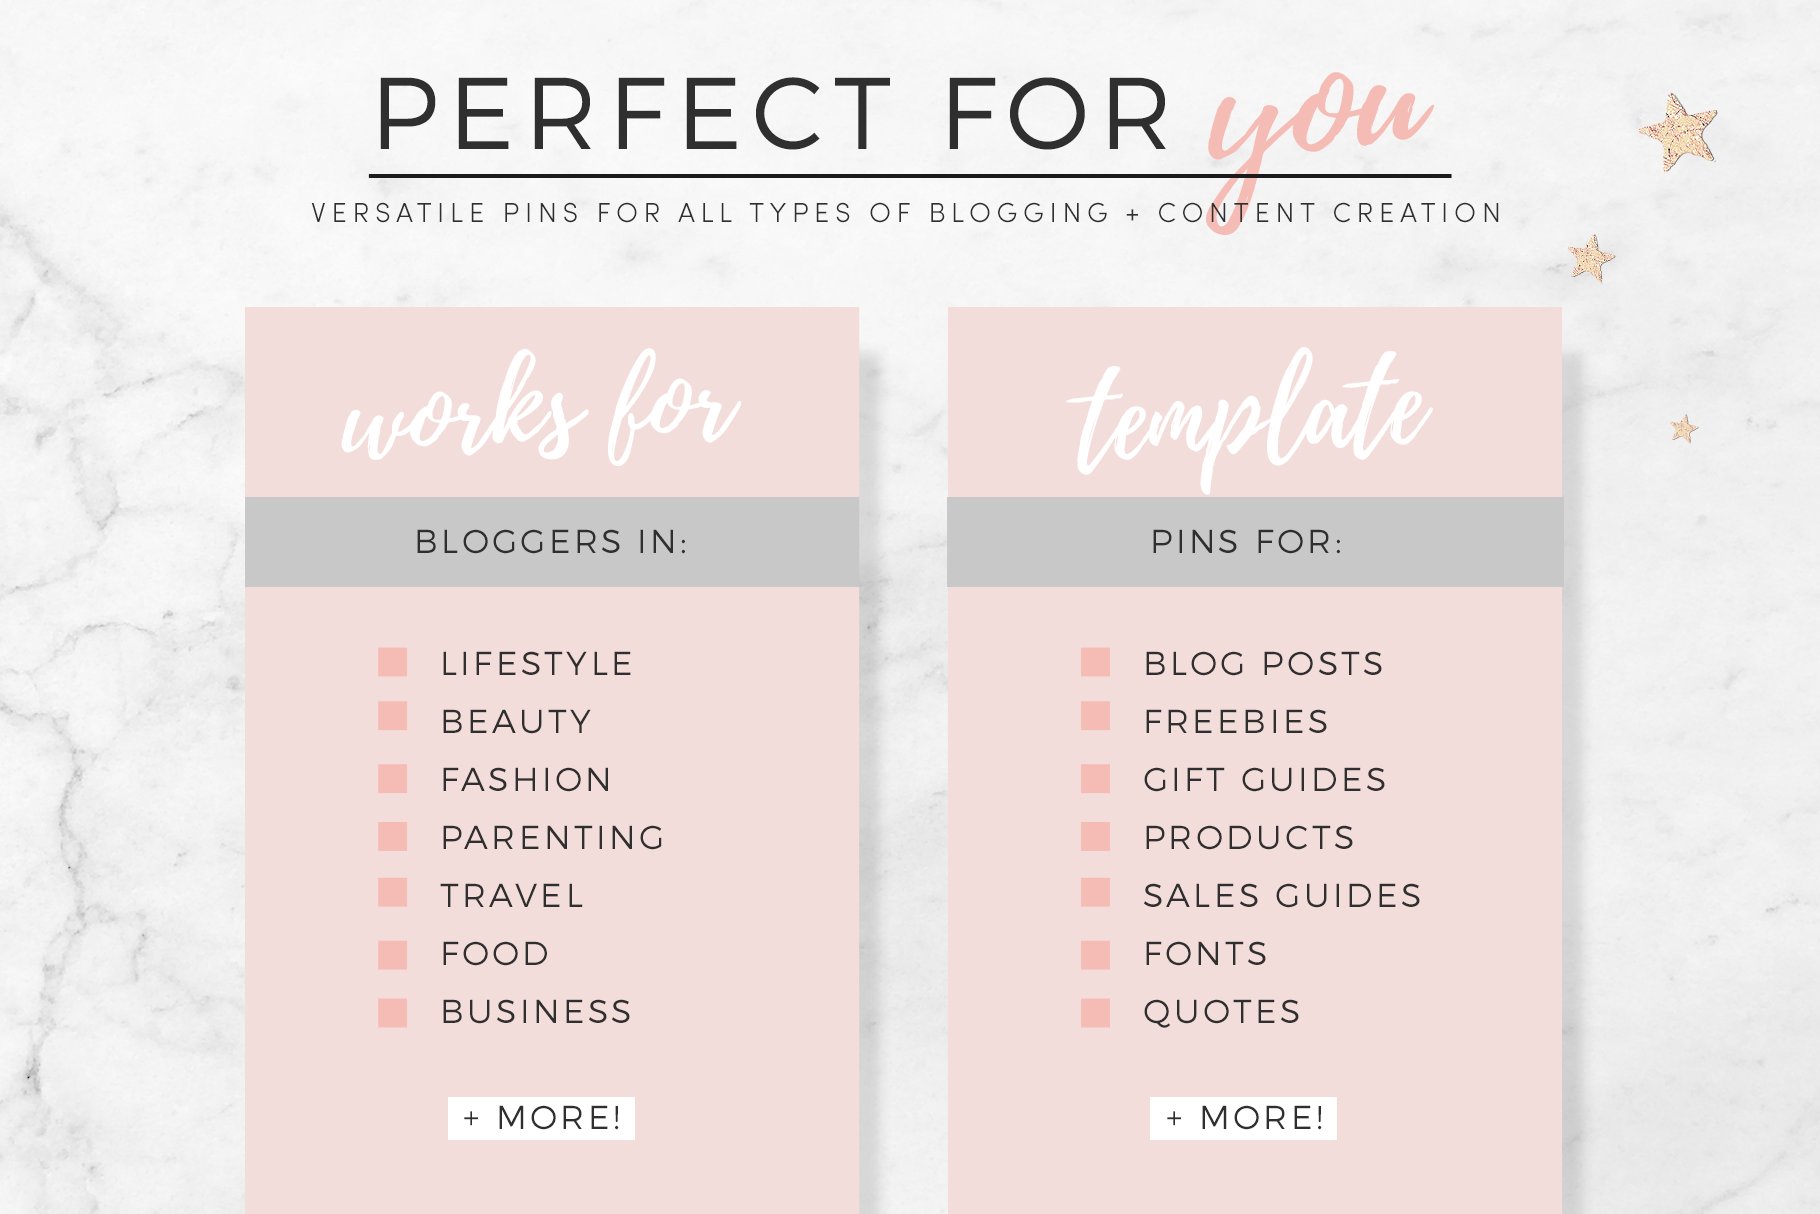 Versatility Pin for all types blogging.